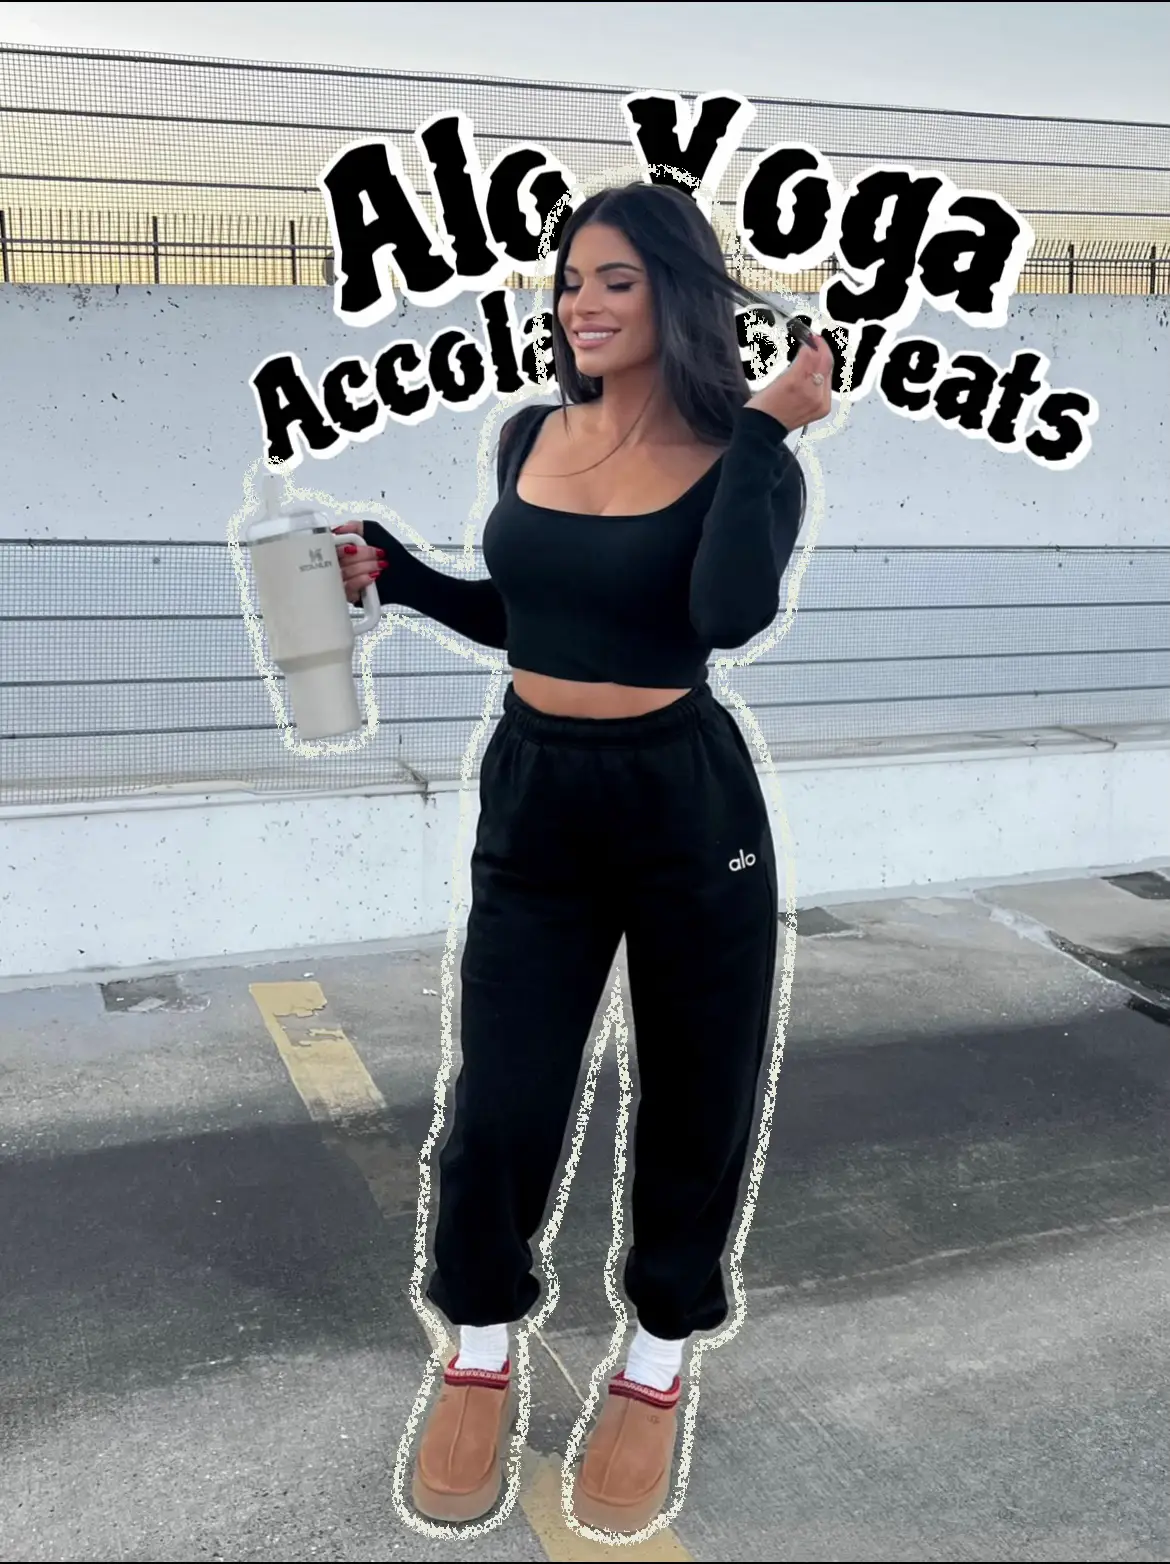 🏆Alo Yoga accolade sweats🏆, Gallery posted by Sam ”Chippy”